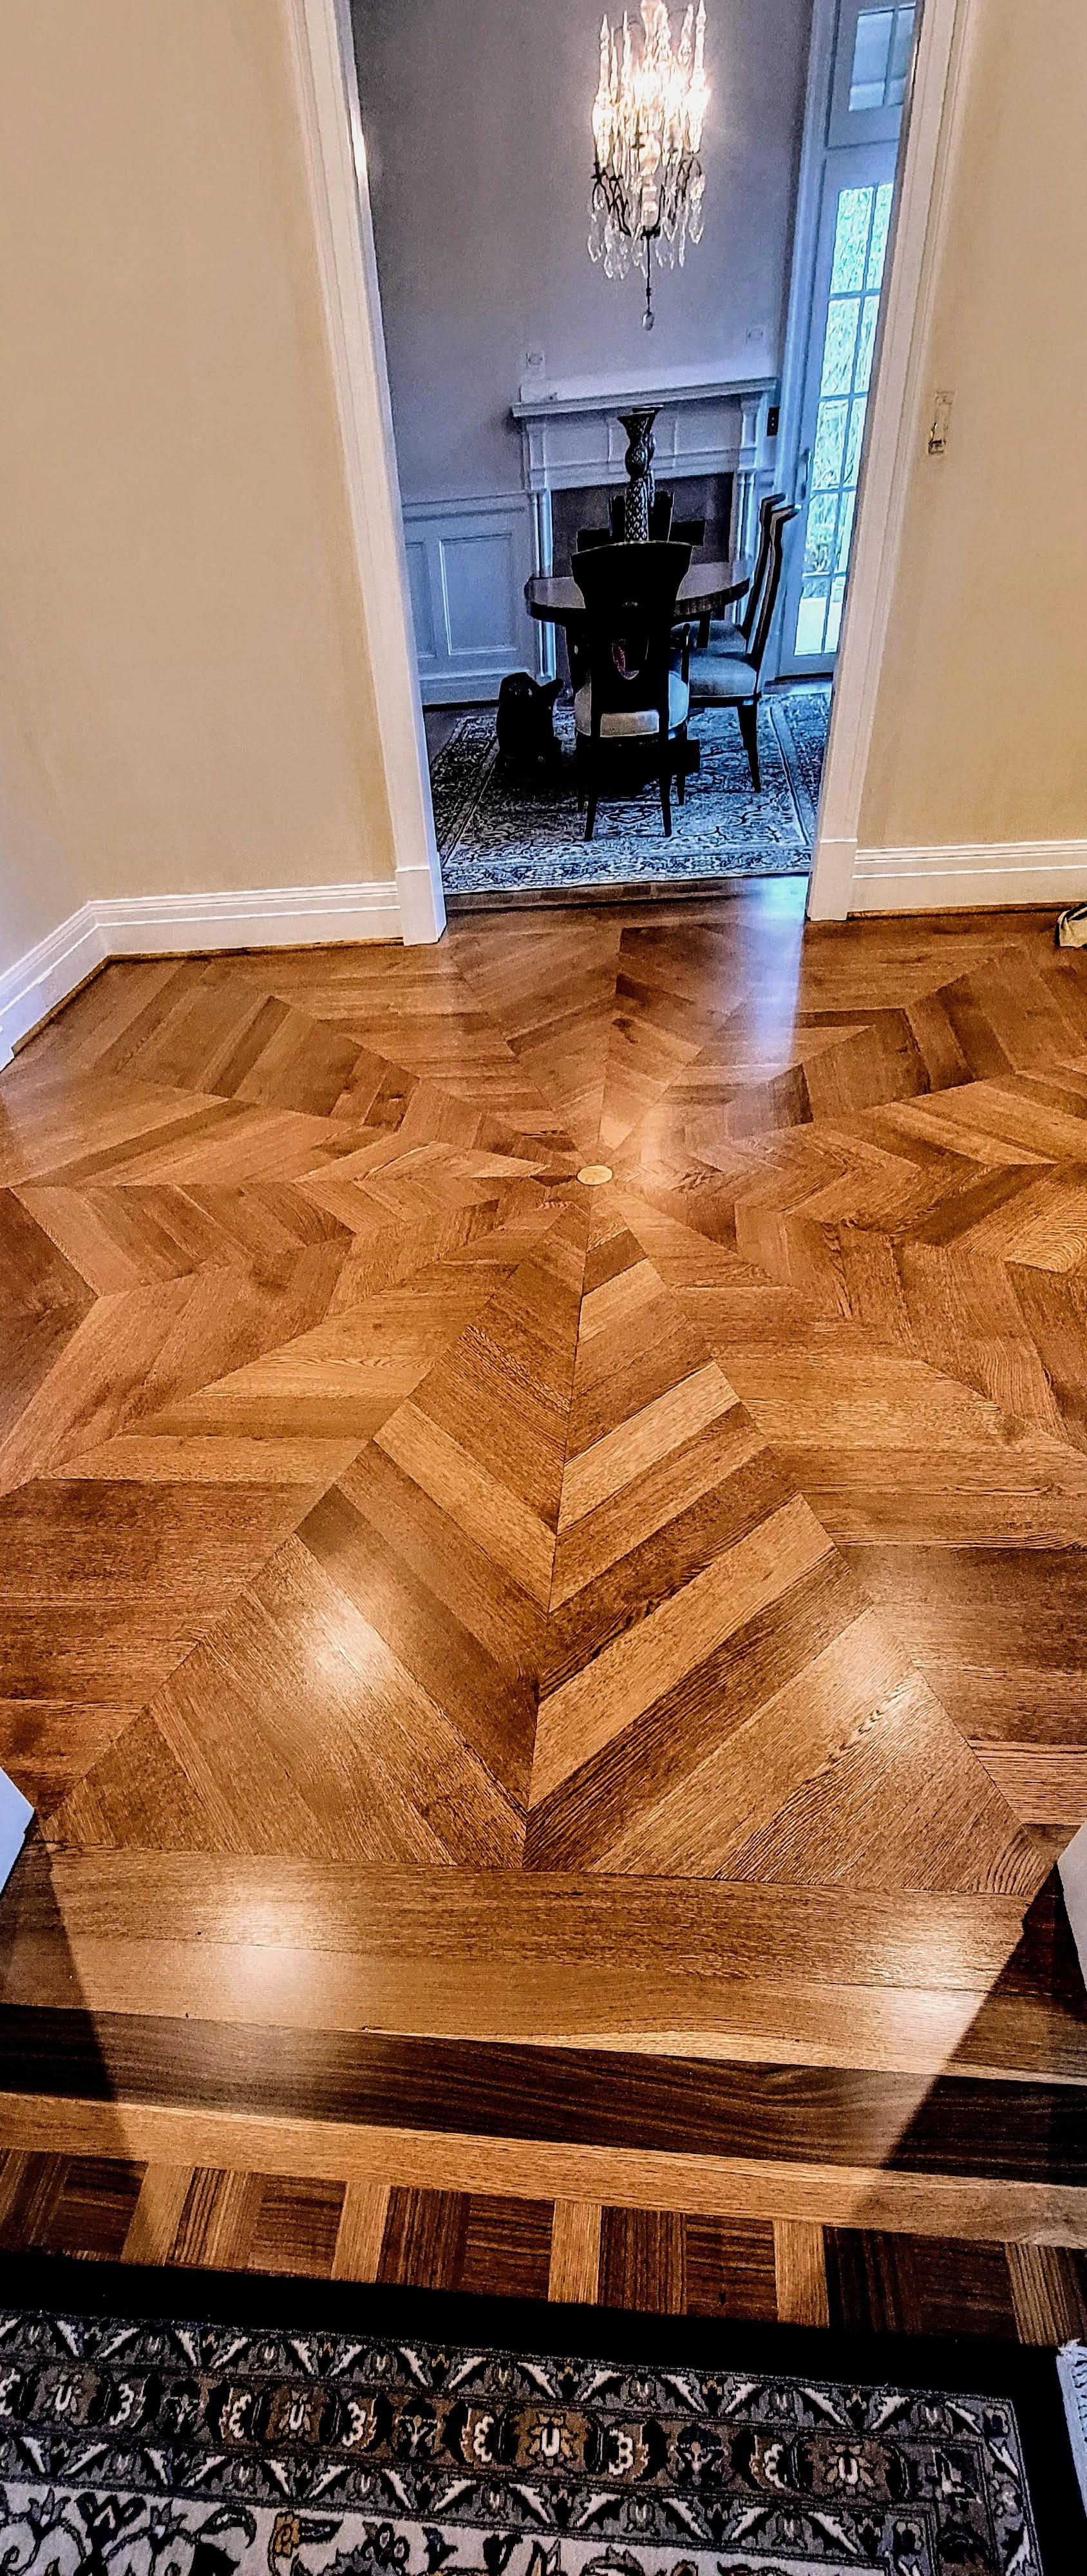 For centuries highly-skilled craftsmen have created extraordinary hardwood floors by hand; Southern Oaks Flooring honors this heritage by producing exquisite custom floors with unparalleled precision. When you're looking to update your hardwood floor with a unique pattern that will start conversations, contact the best in the business!